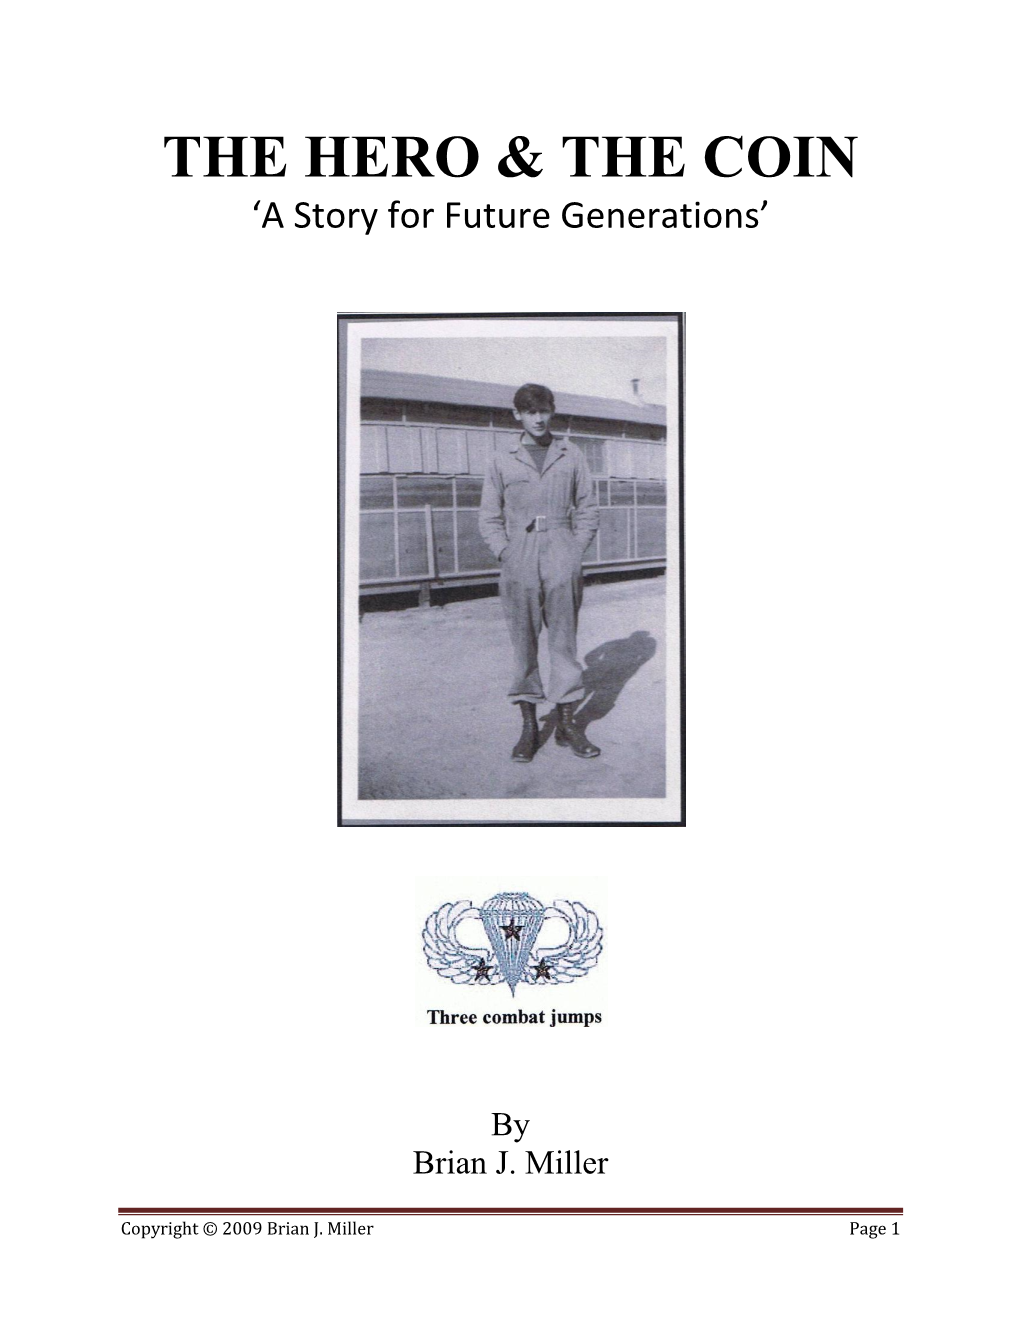 THE HERO and the COIN: a Story for Future Generations